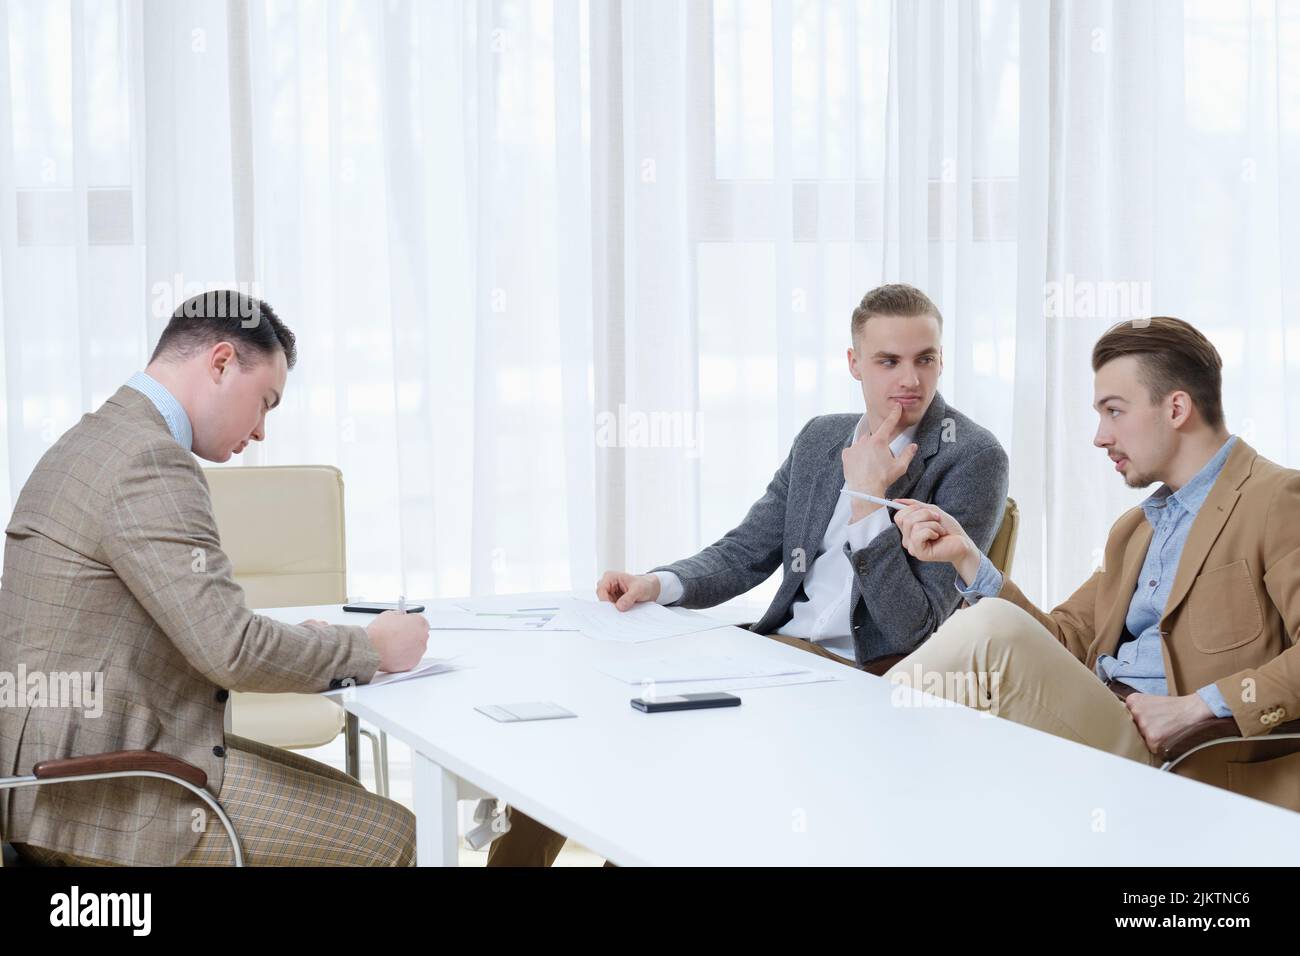 business meeting discussion team managers talking Stock Photo